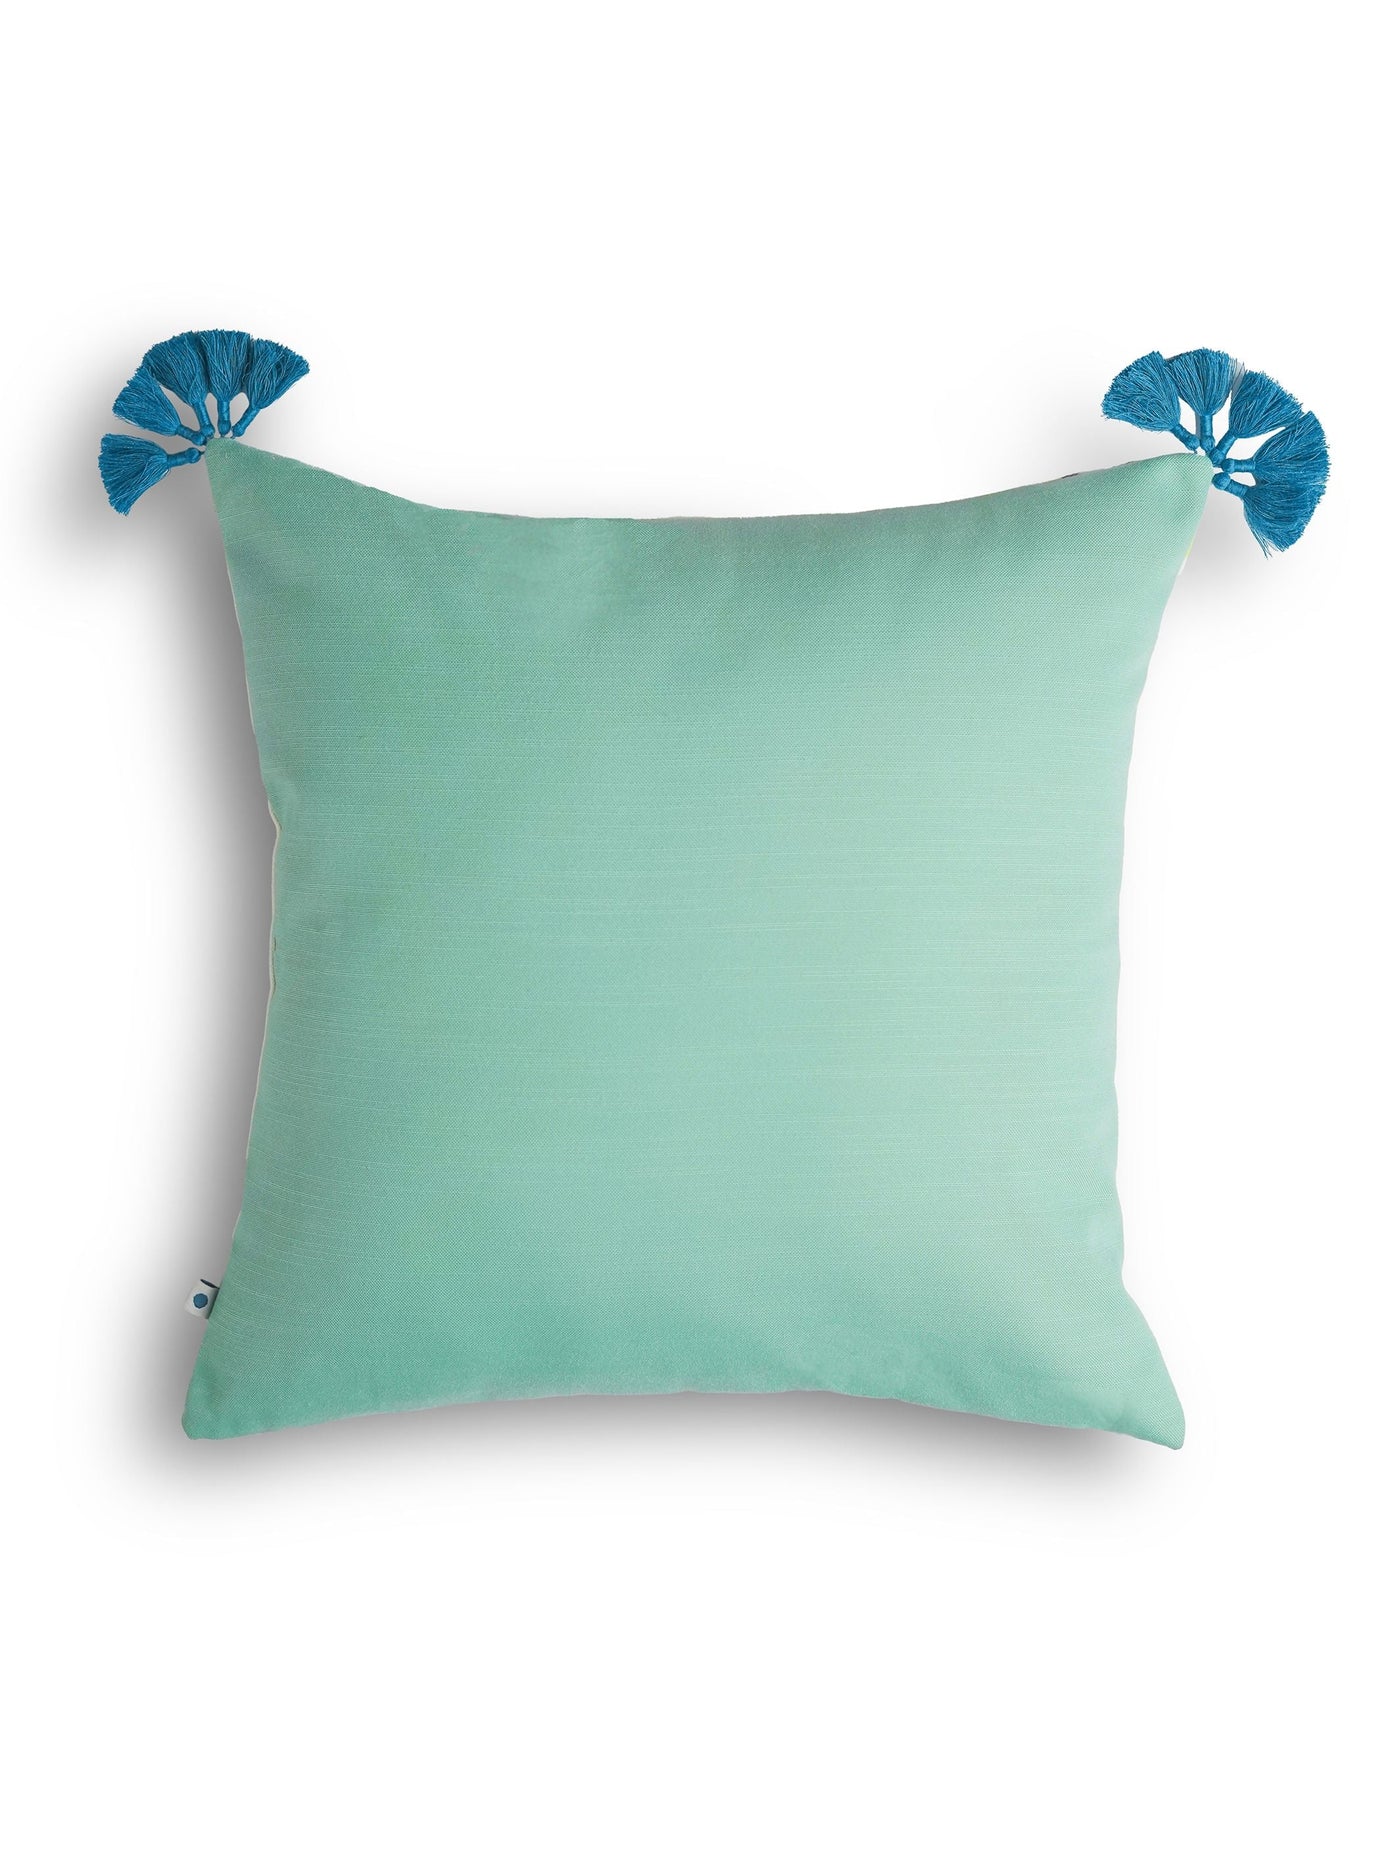 Gardenscape Cushion Cover Turquoise